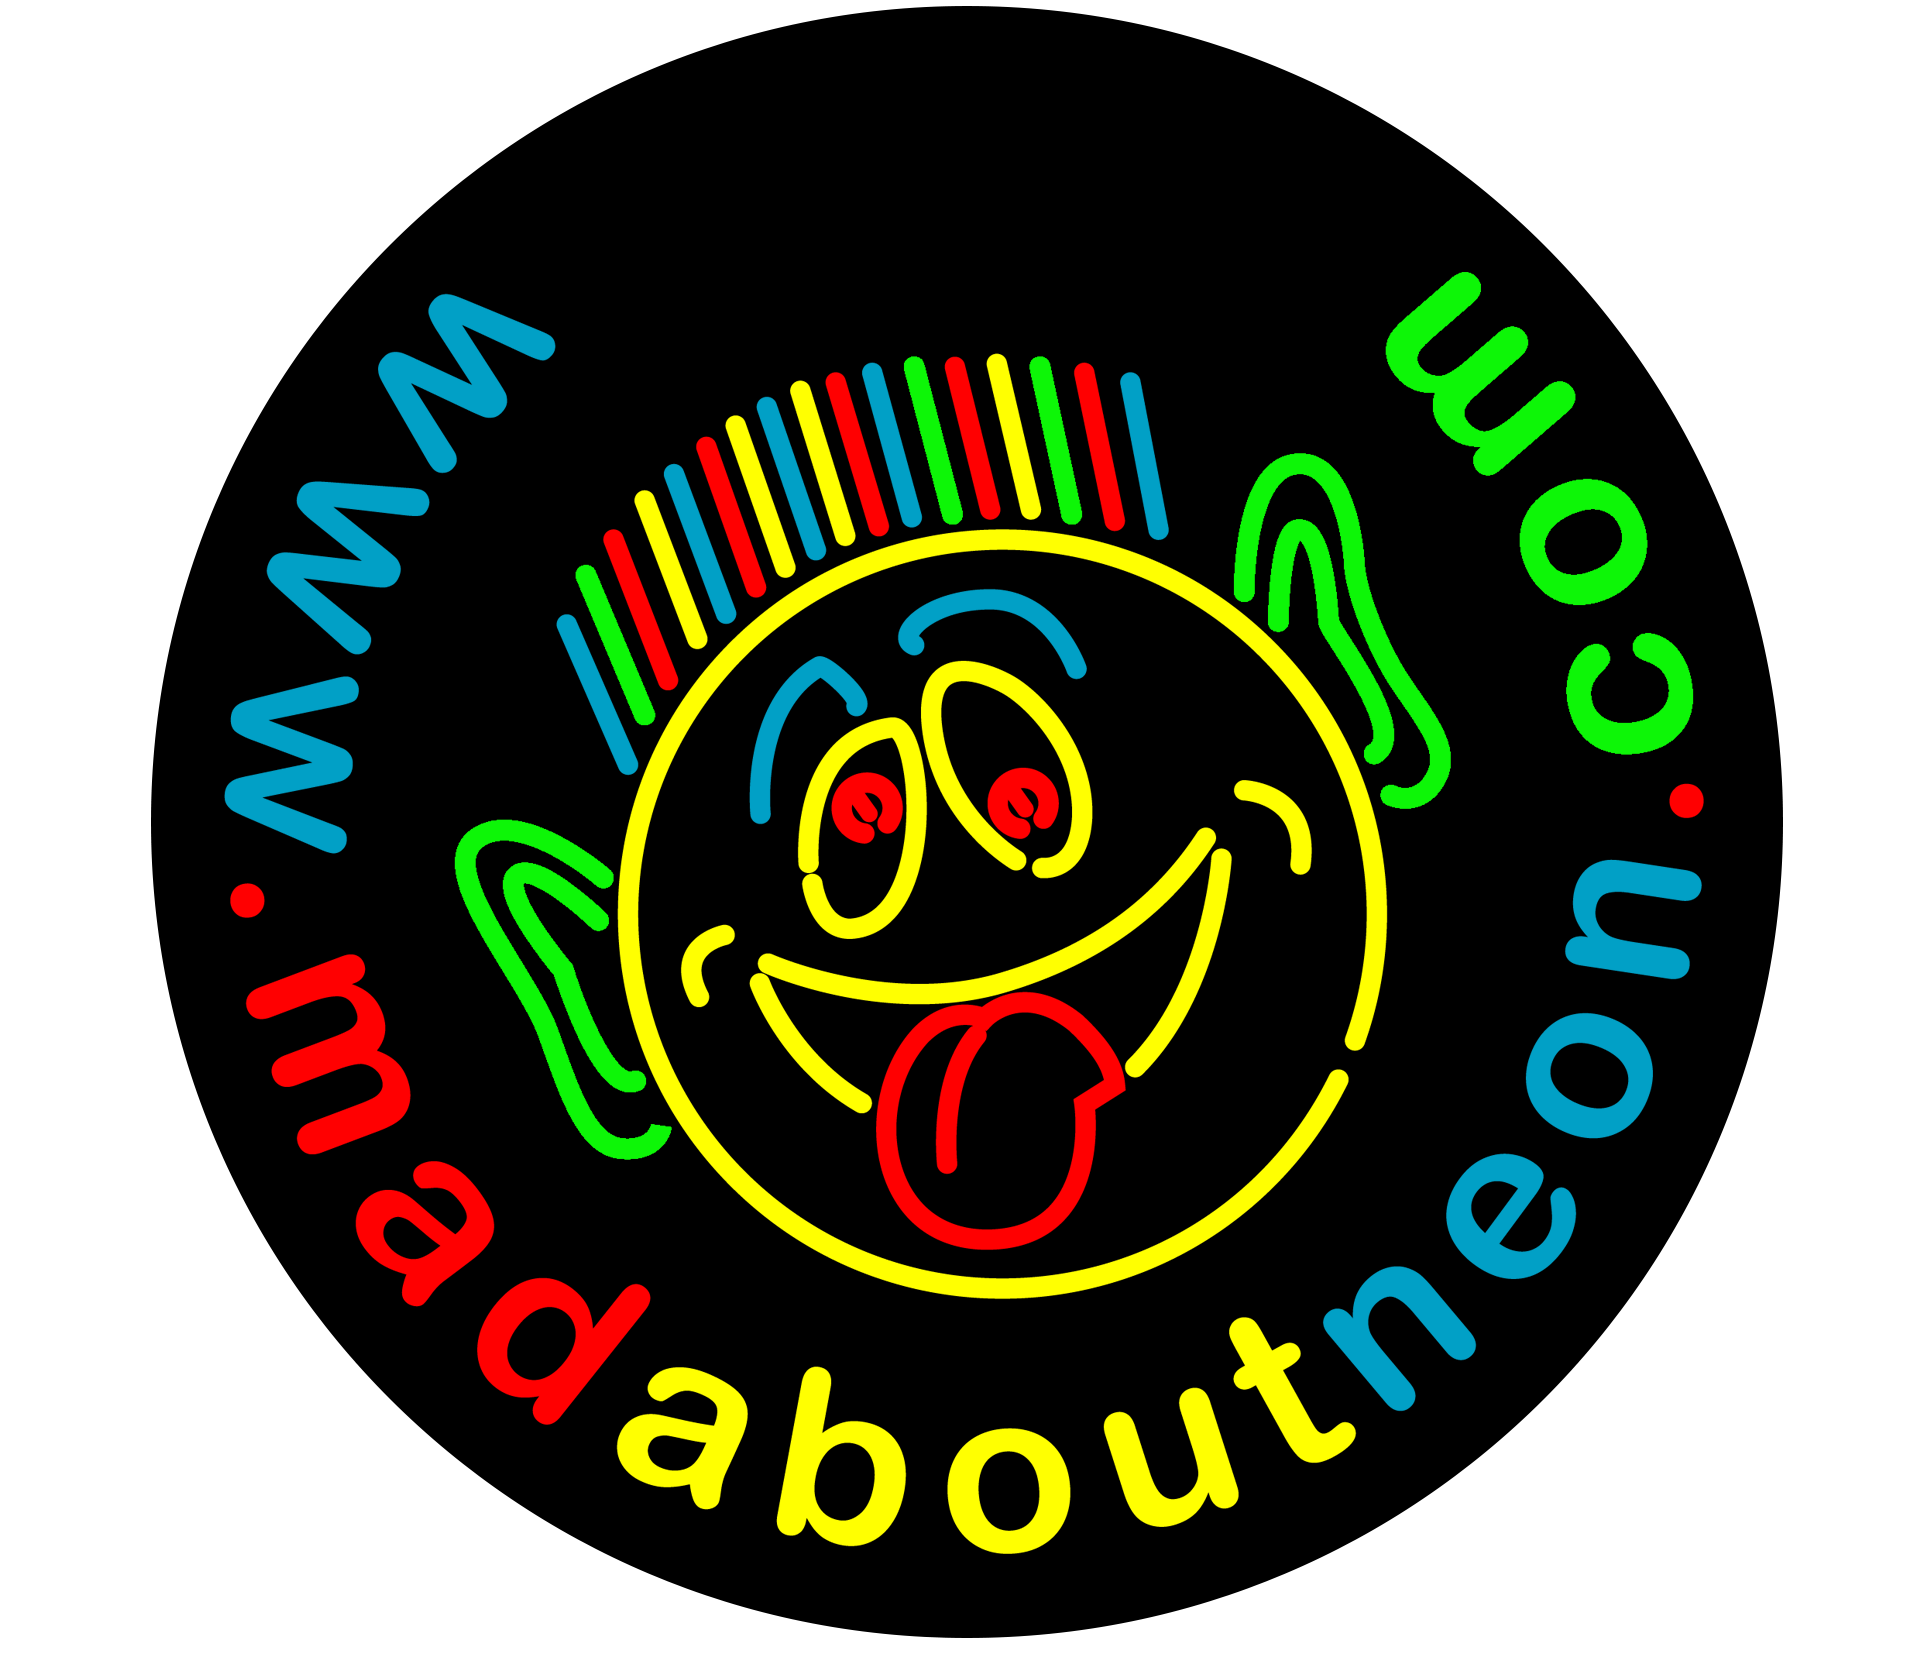 Mad About Neon Ltd